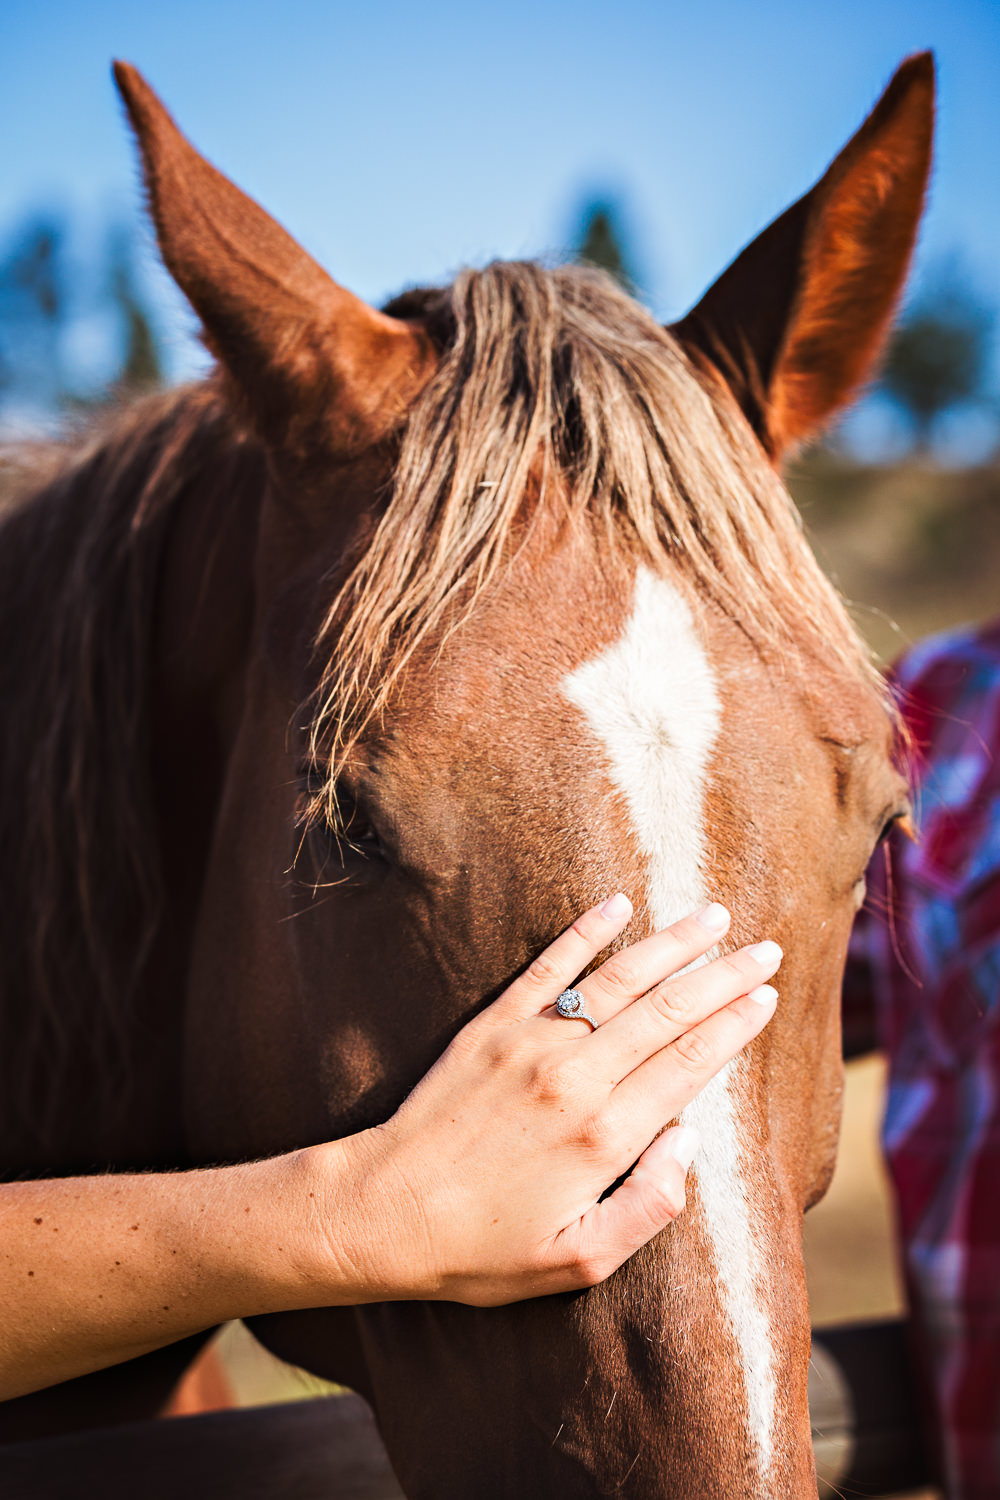 billings-montana-engagement-session-engagement-ring-and-horse.jpg